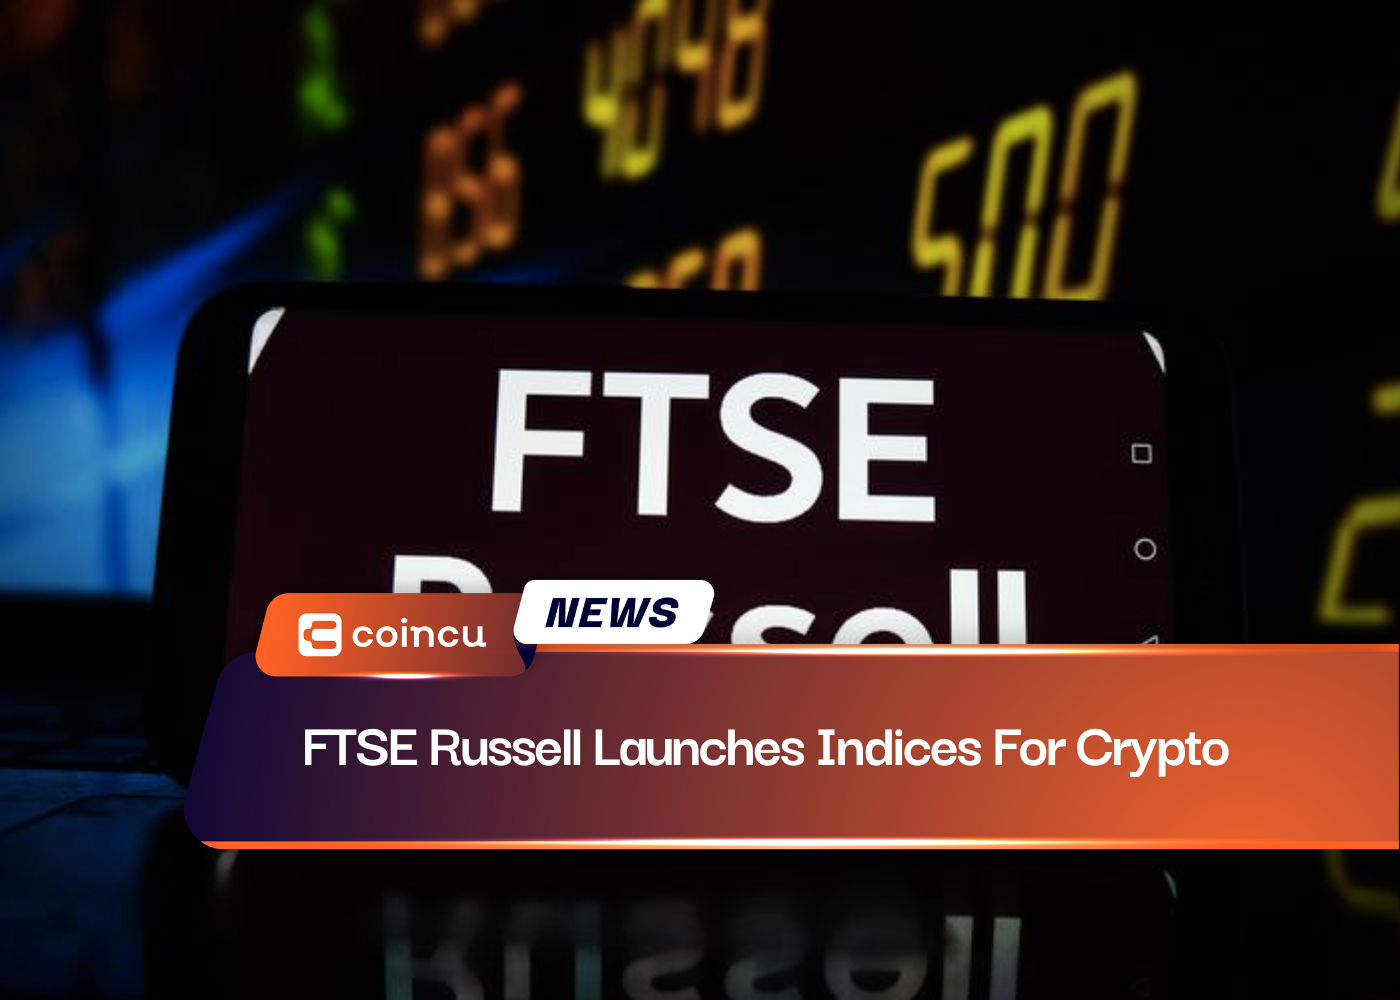 FTSE Russell Launches Indices For Crypto